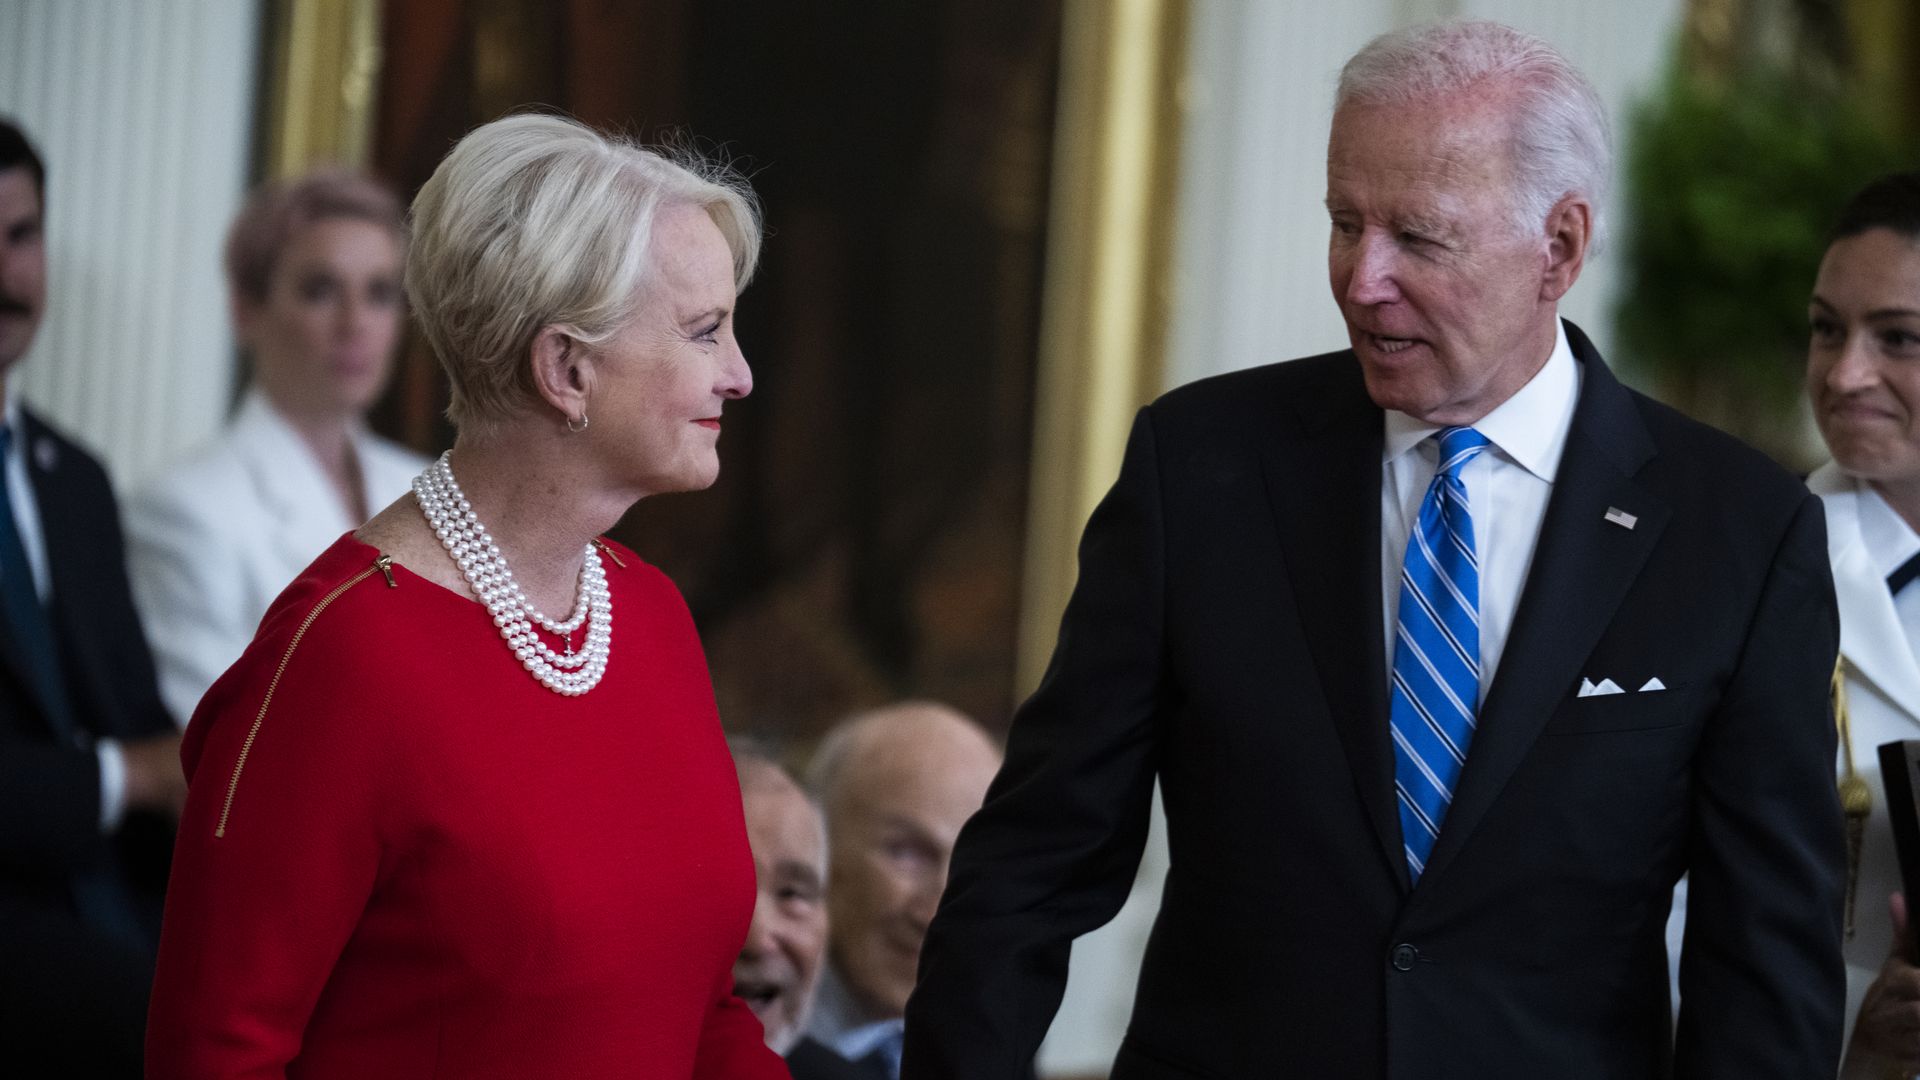 President Biden and Cindy McCain at a ceremony 